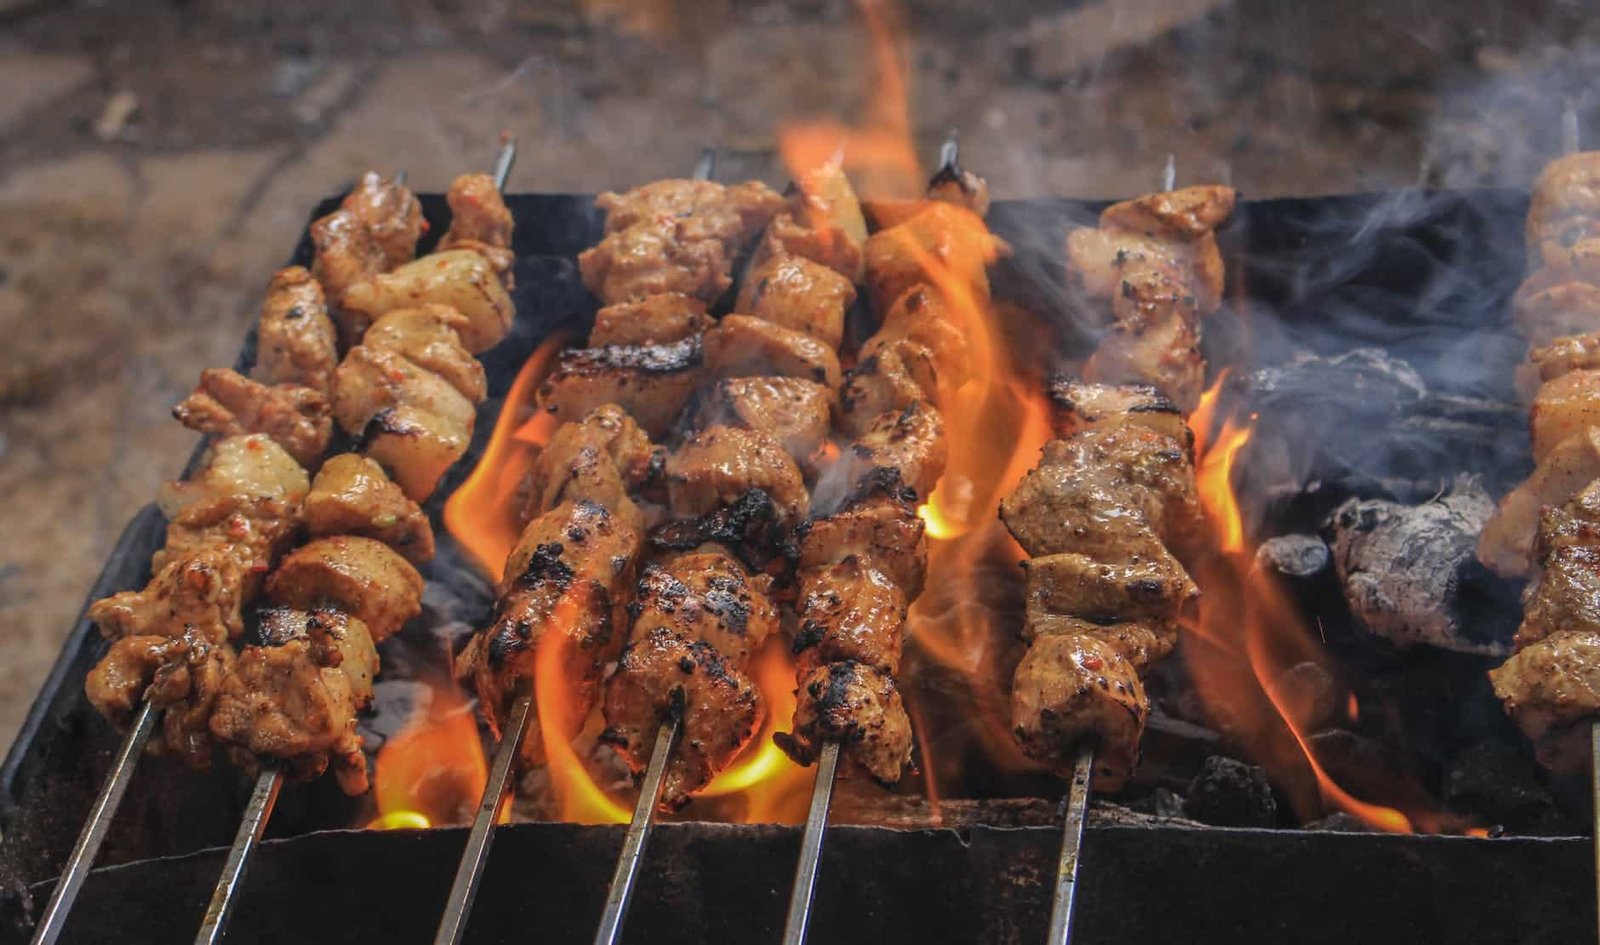 grilled meats on skewers